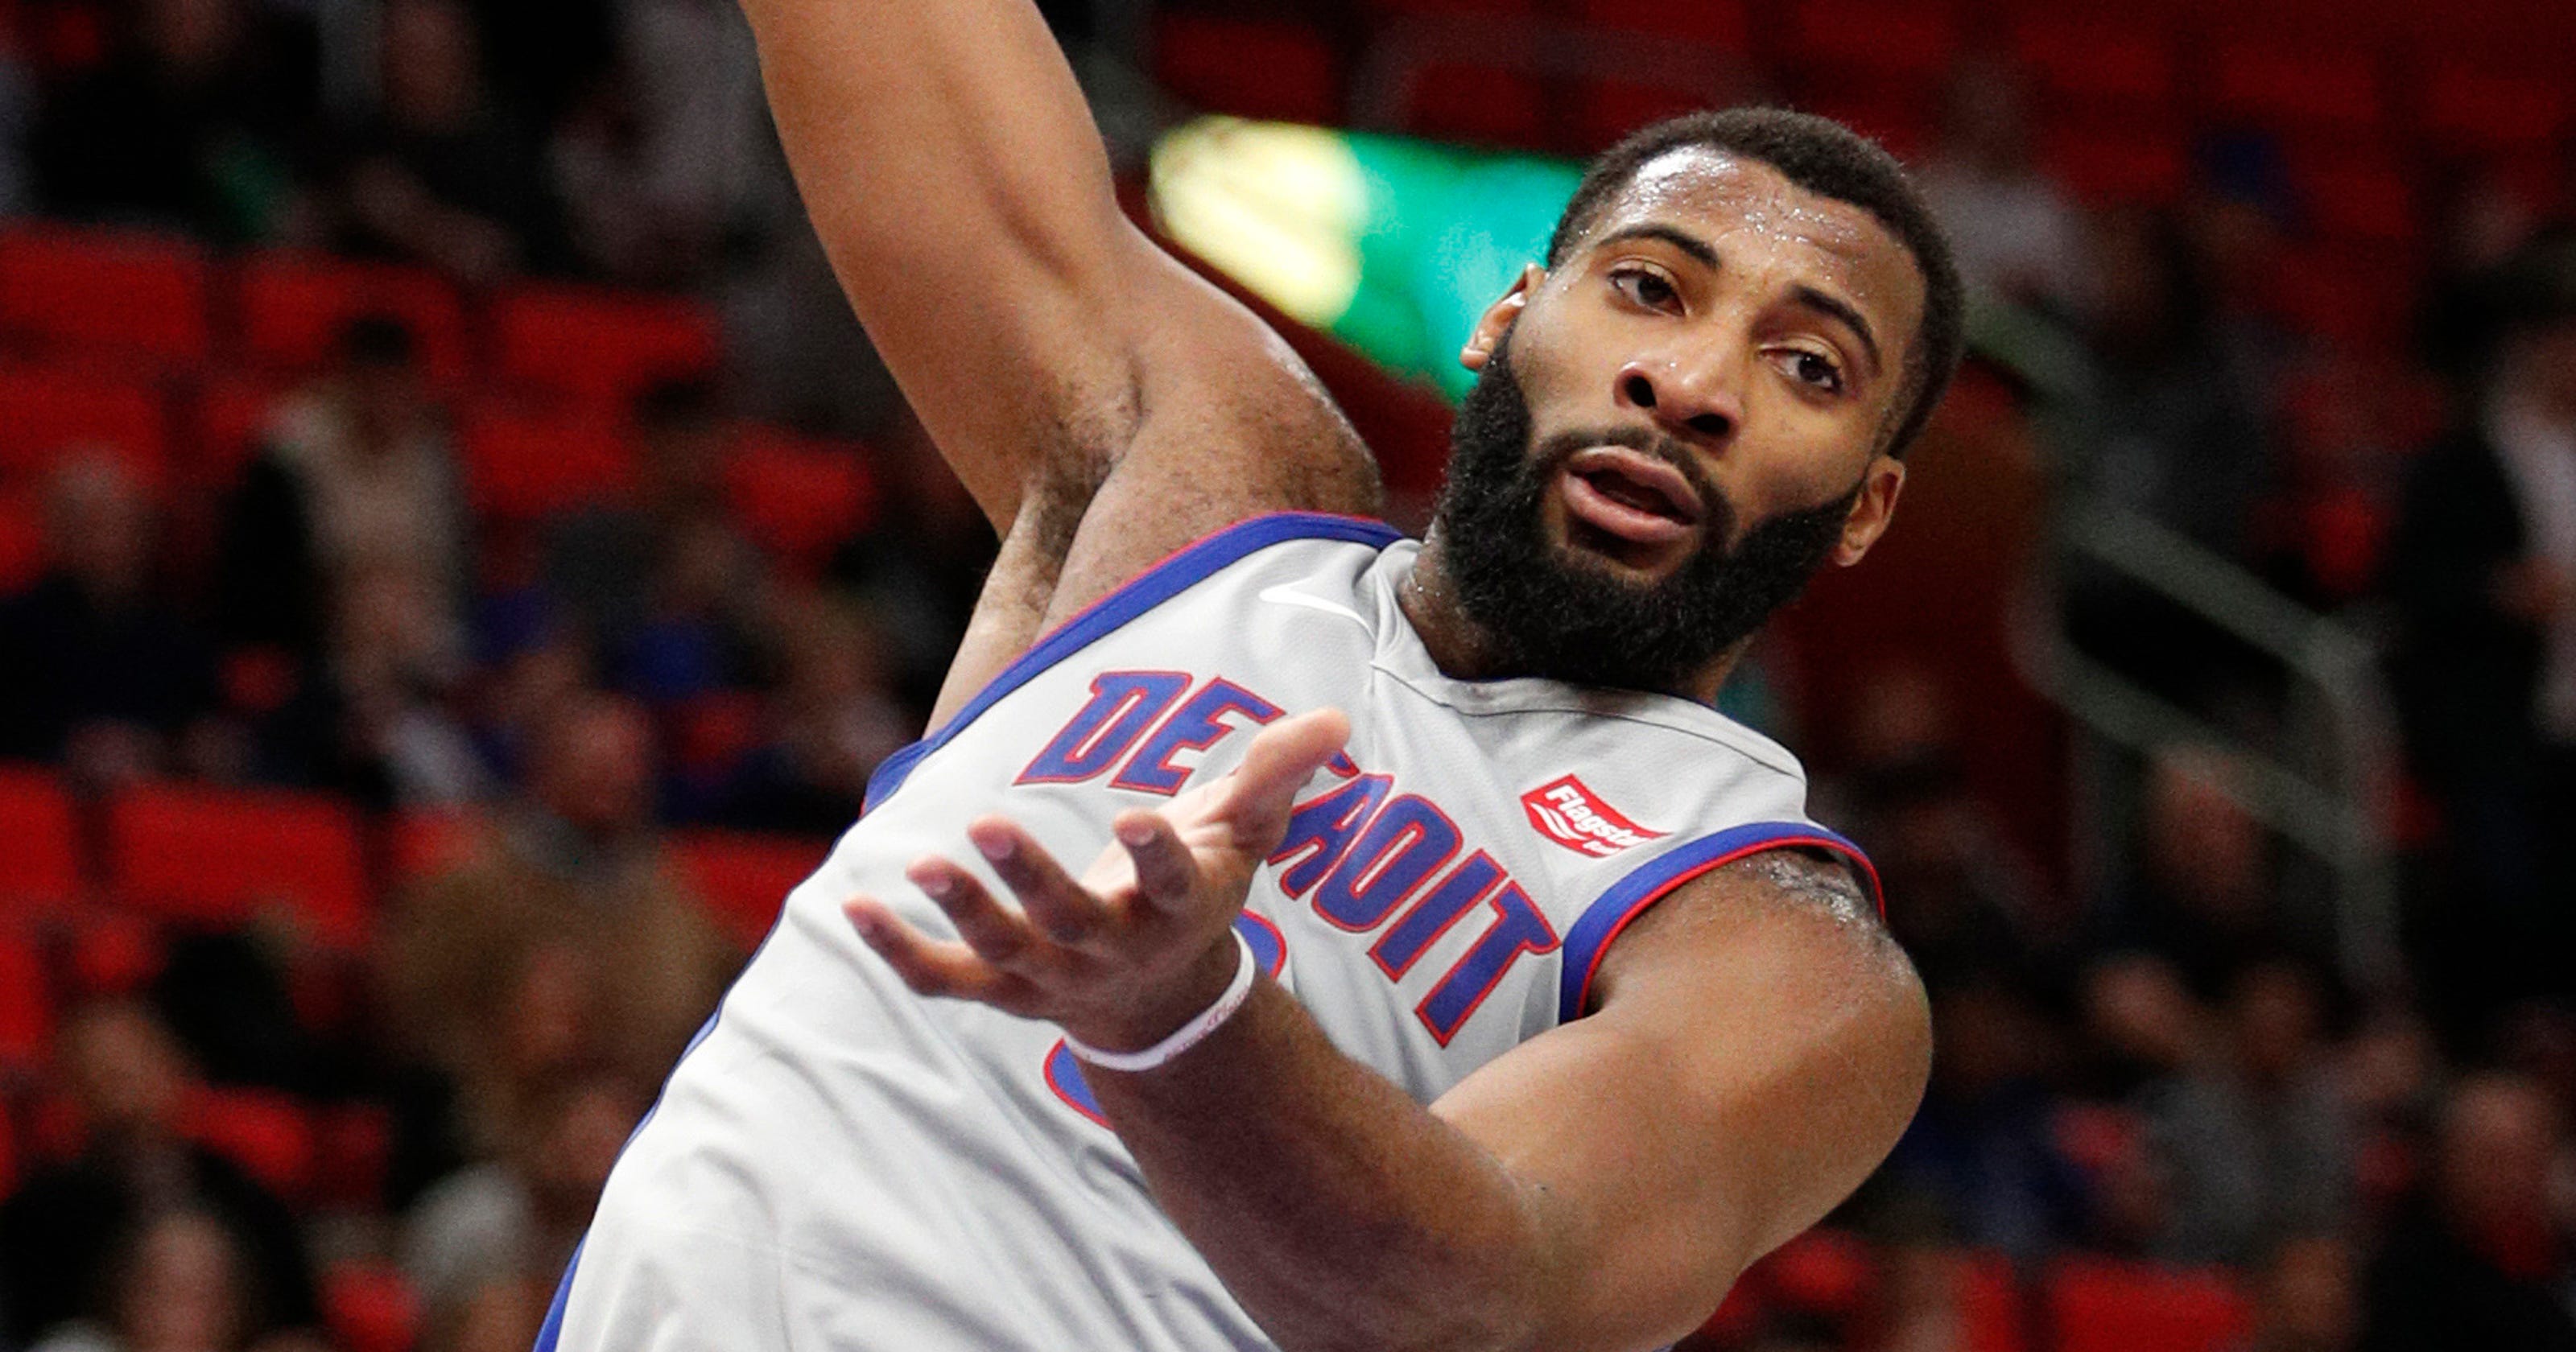 Pistons' Andre Drummond is John Wall's NBA All-Star Game replacement3200 x 1680